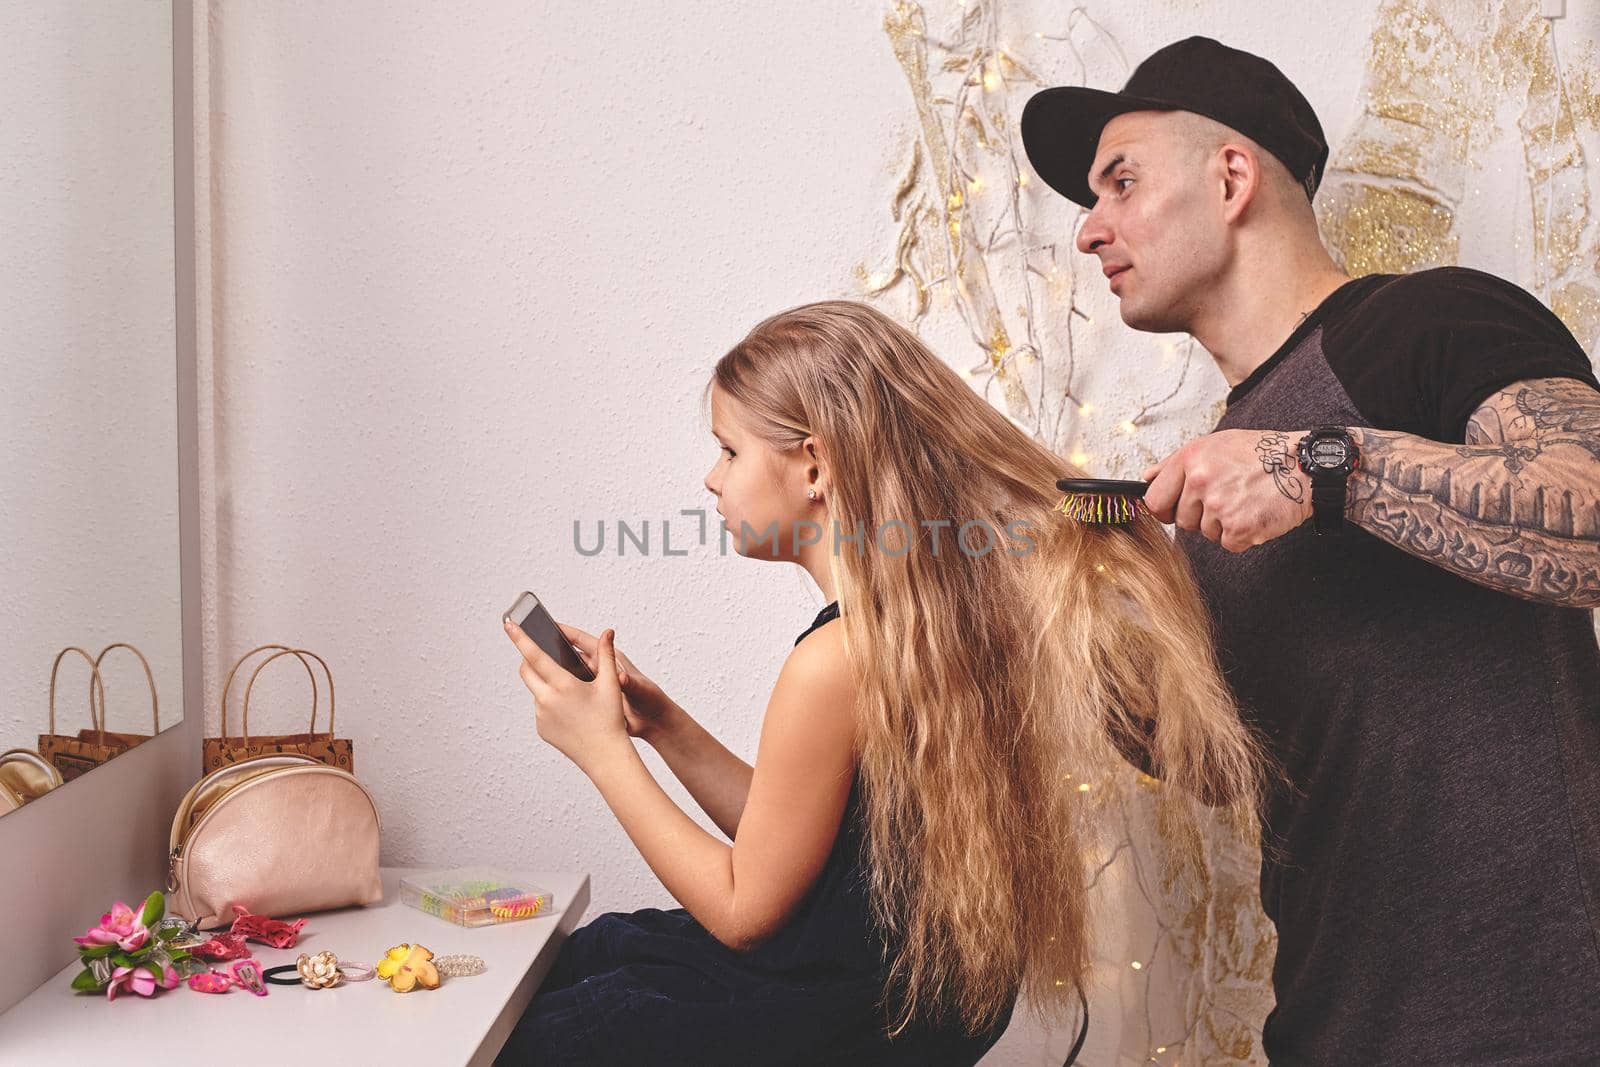 Cute little daughter and her tattoed dad are playing together near a mirror. Handsome dad is drying his daughter's hair while she is looking at her phone. Family holiday and togetherness.